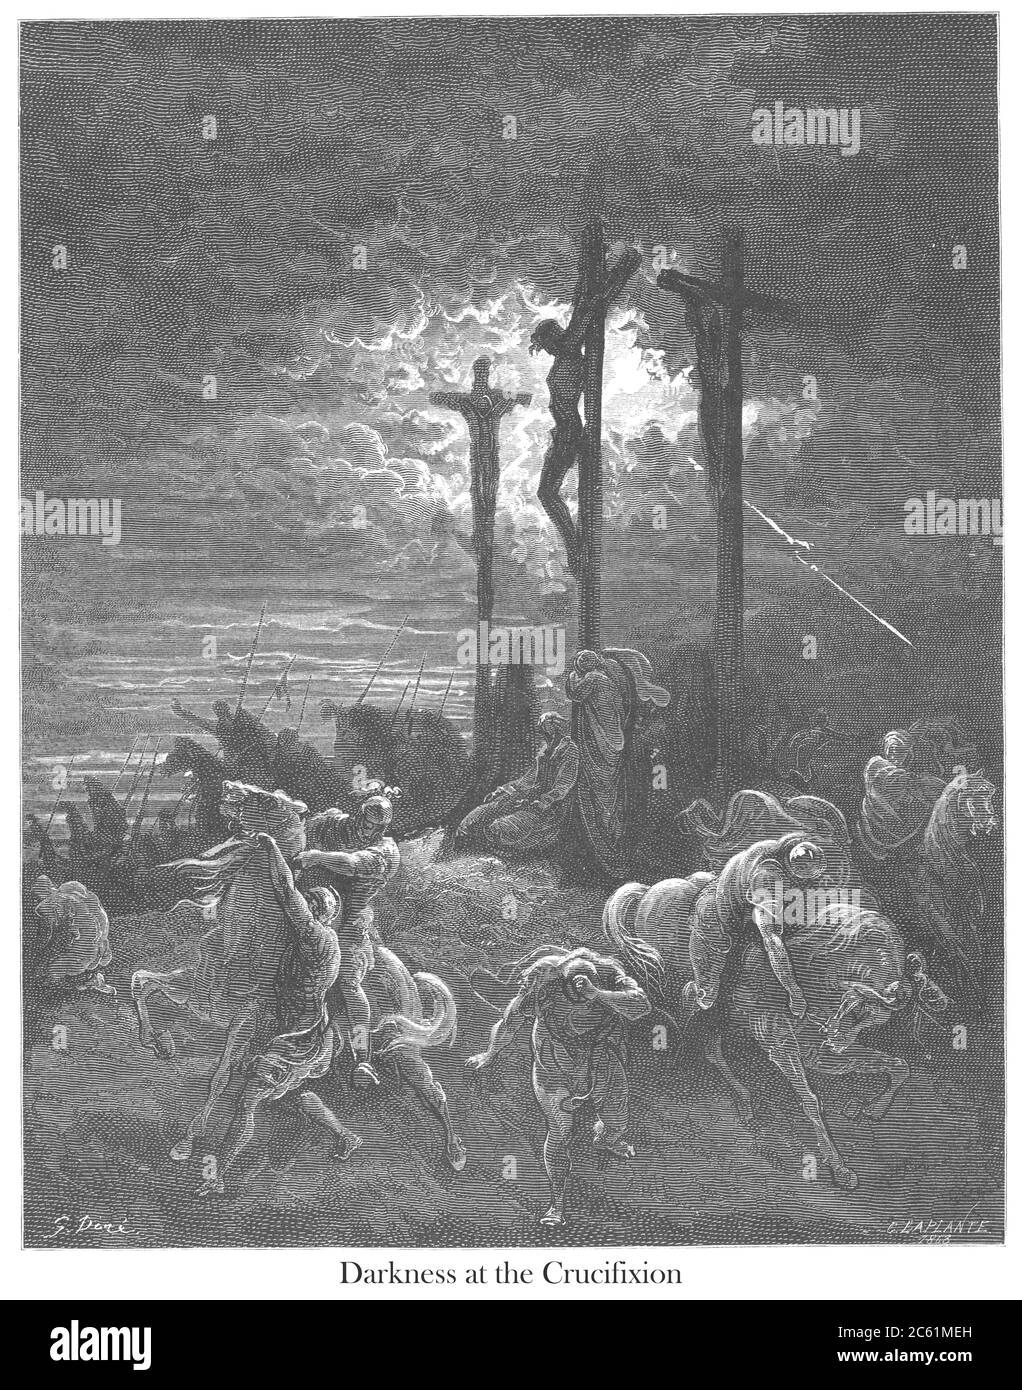 The Darkness at the Crucifixion [Luke 23:44-45] From the book 'Bible Gallery' Illustrated by Gustave Dore with Memoir of Dore and Descriptive Letter-press by Talbot W. Chambers D.D. Published by Cassell & Company Limited in London and simultaneously by Mame in Tours, France in 1866 Stock Photo